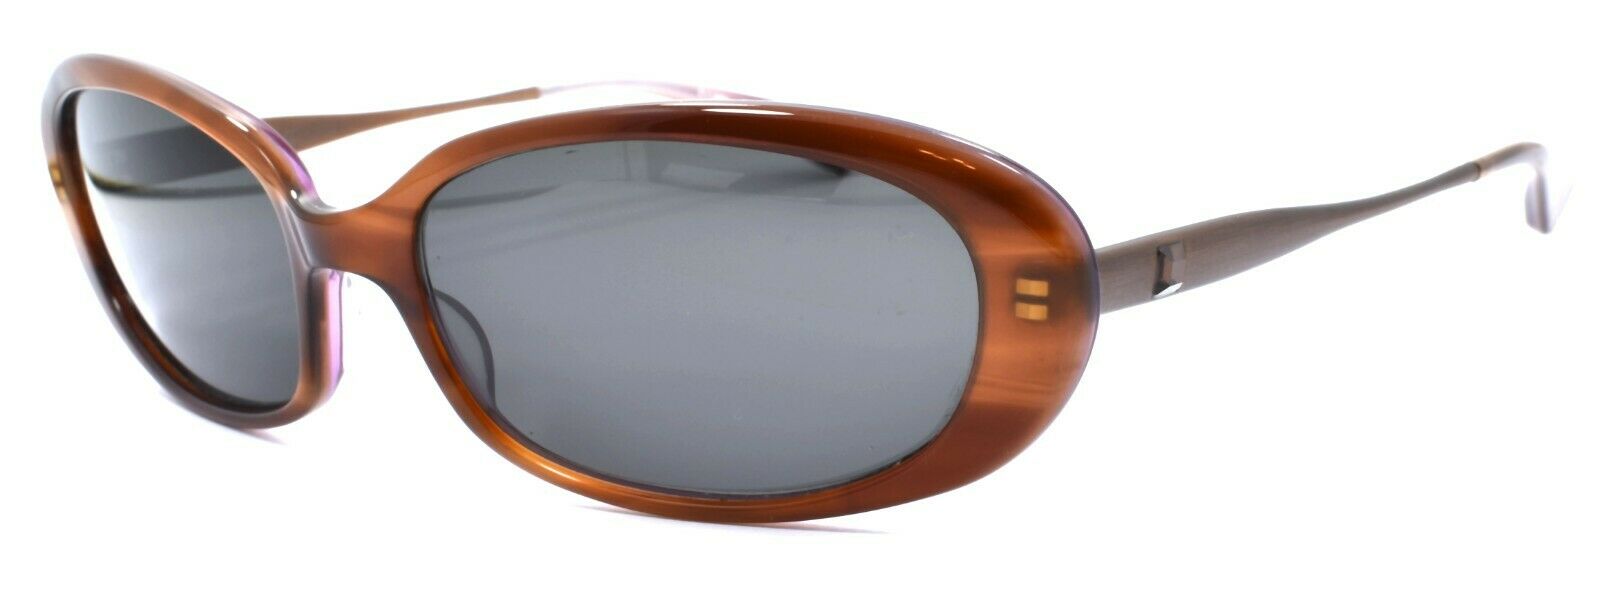 1-Oliver Peoples Marion Women's Sunglasses Brown on Violet / Gray JAPAN-Does not apply-IKSpecs